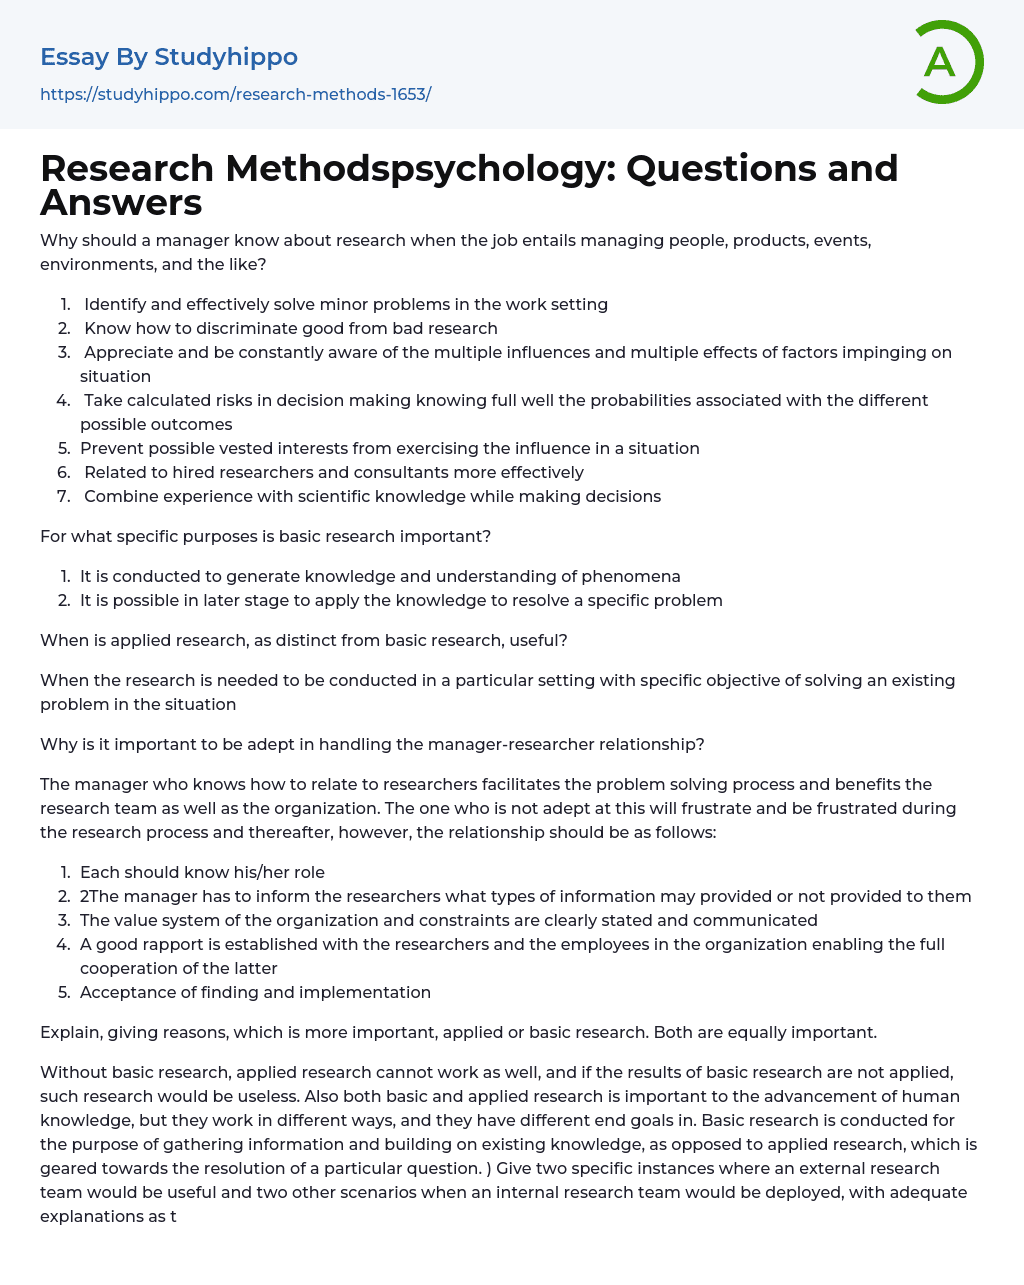 Research Methodspsychology: Questions and Answers Essay Example